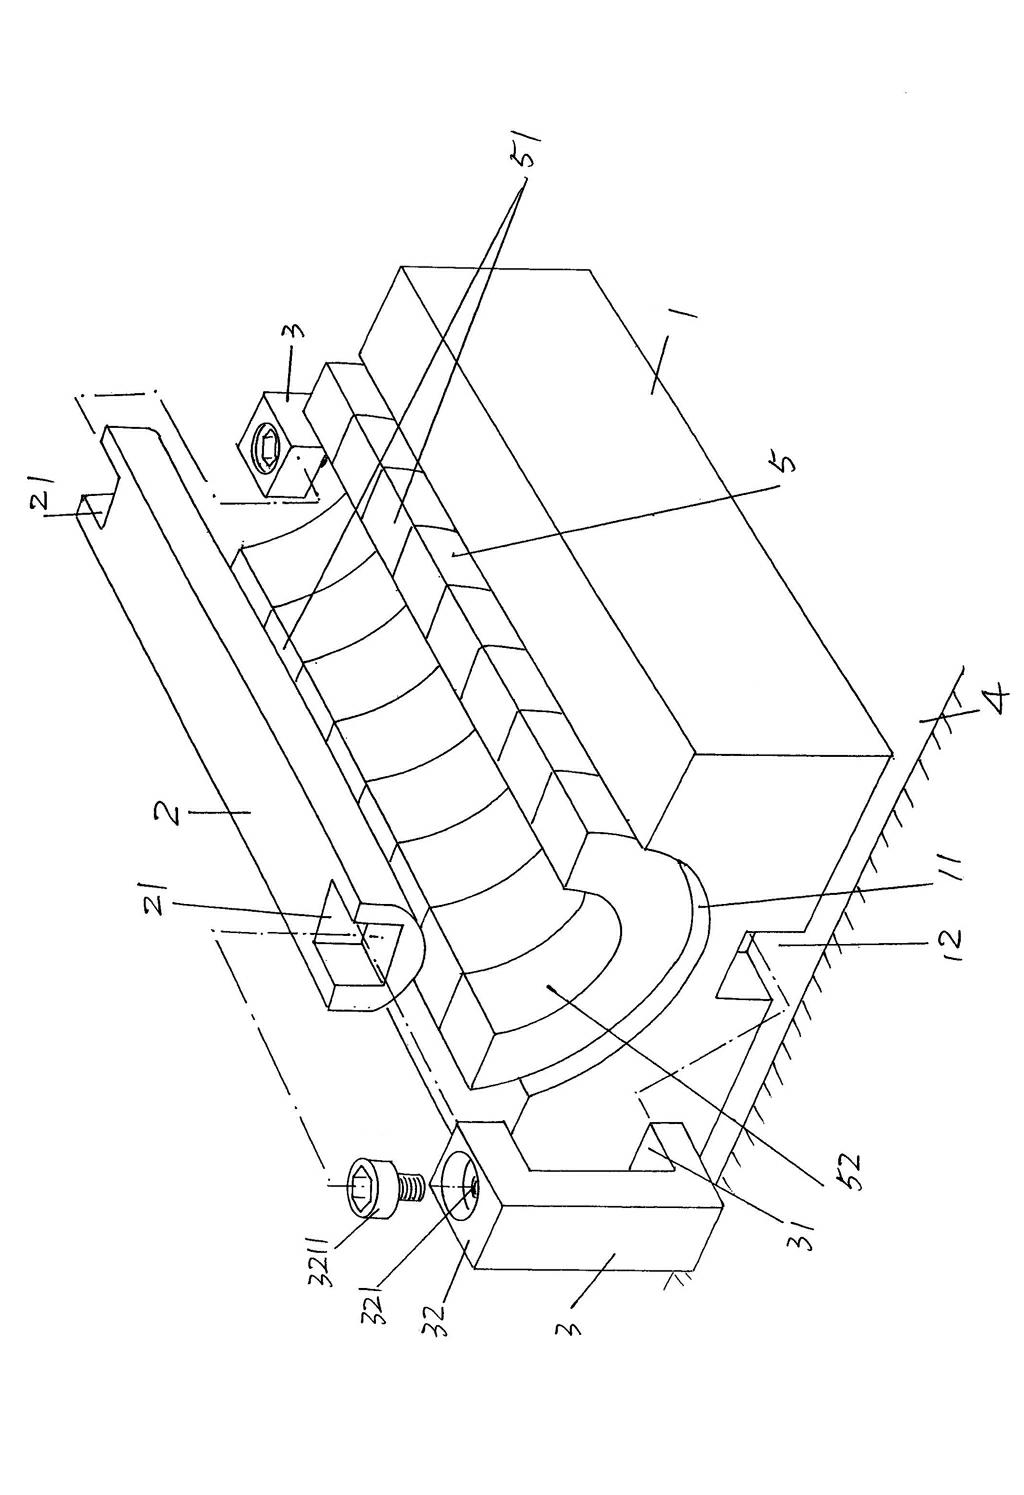 Clamp structure for C-shaped ferrite magnetic core